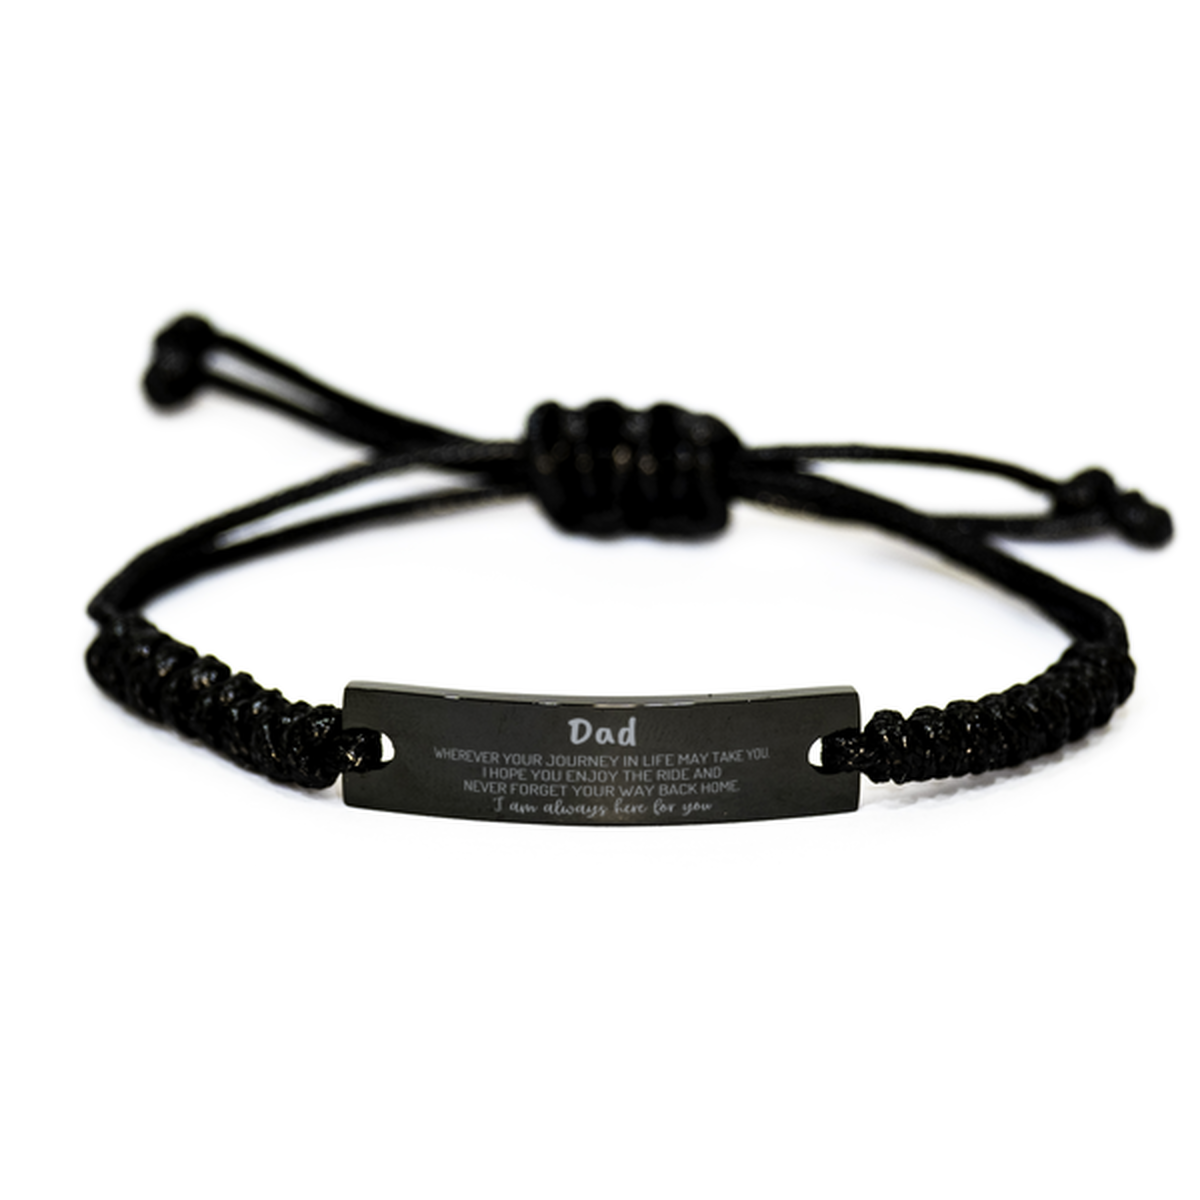 Dad wherever your journey in life may take you, I am always here for you Dad Black Rope Bracelet, Awesome Christmas Gifts For Dad, Dad Birthday Gifts for Men Women Family Loved One